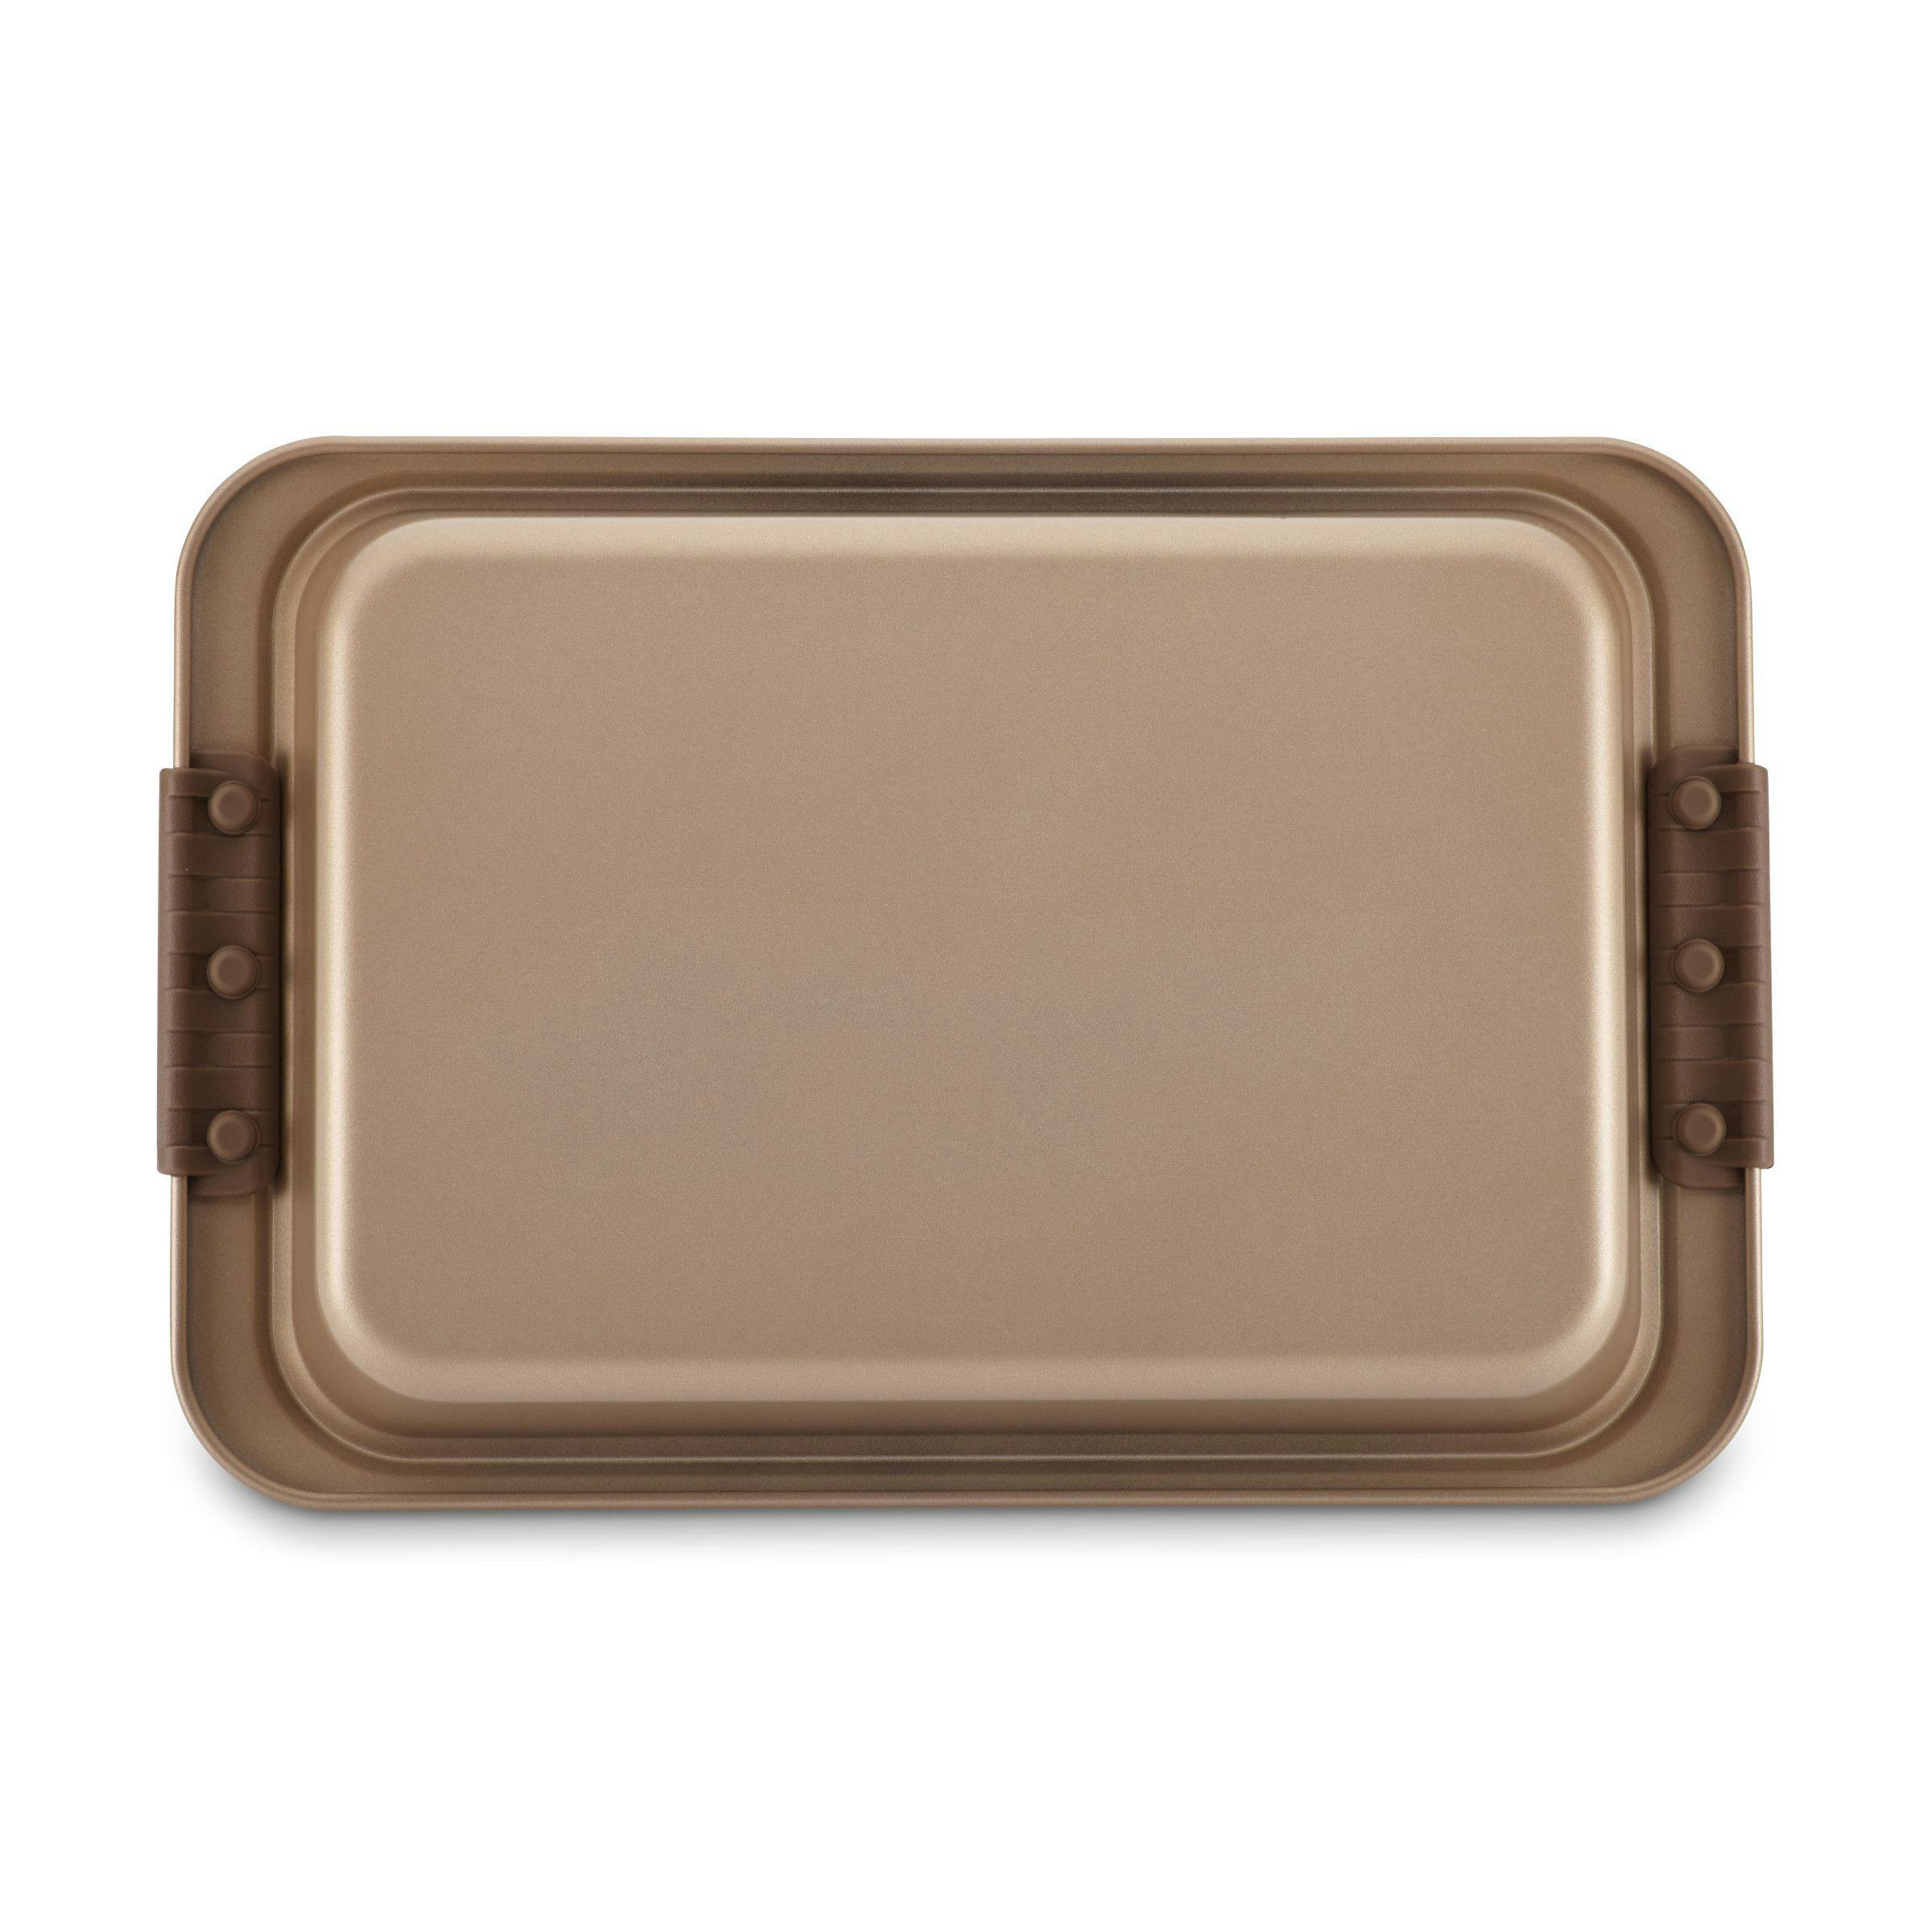 Anolon Advanced Bakeware Nonstick Cake Pan with Lid and Silicone Grips, 9-inch x 13-inch, Bronze